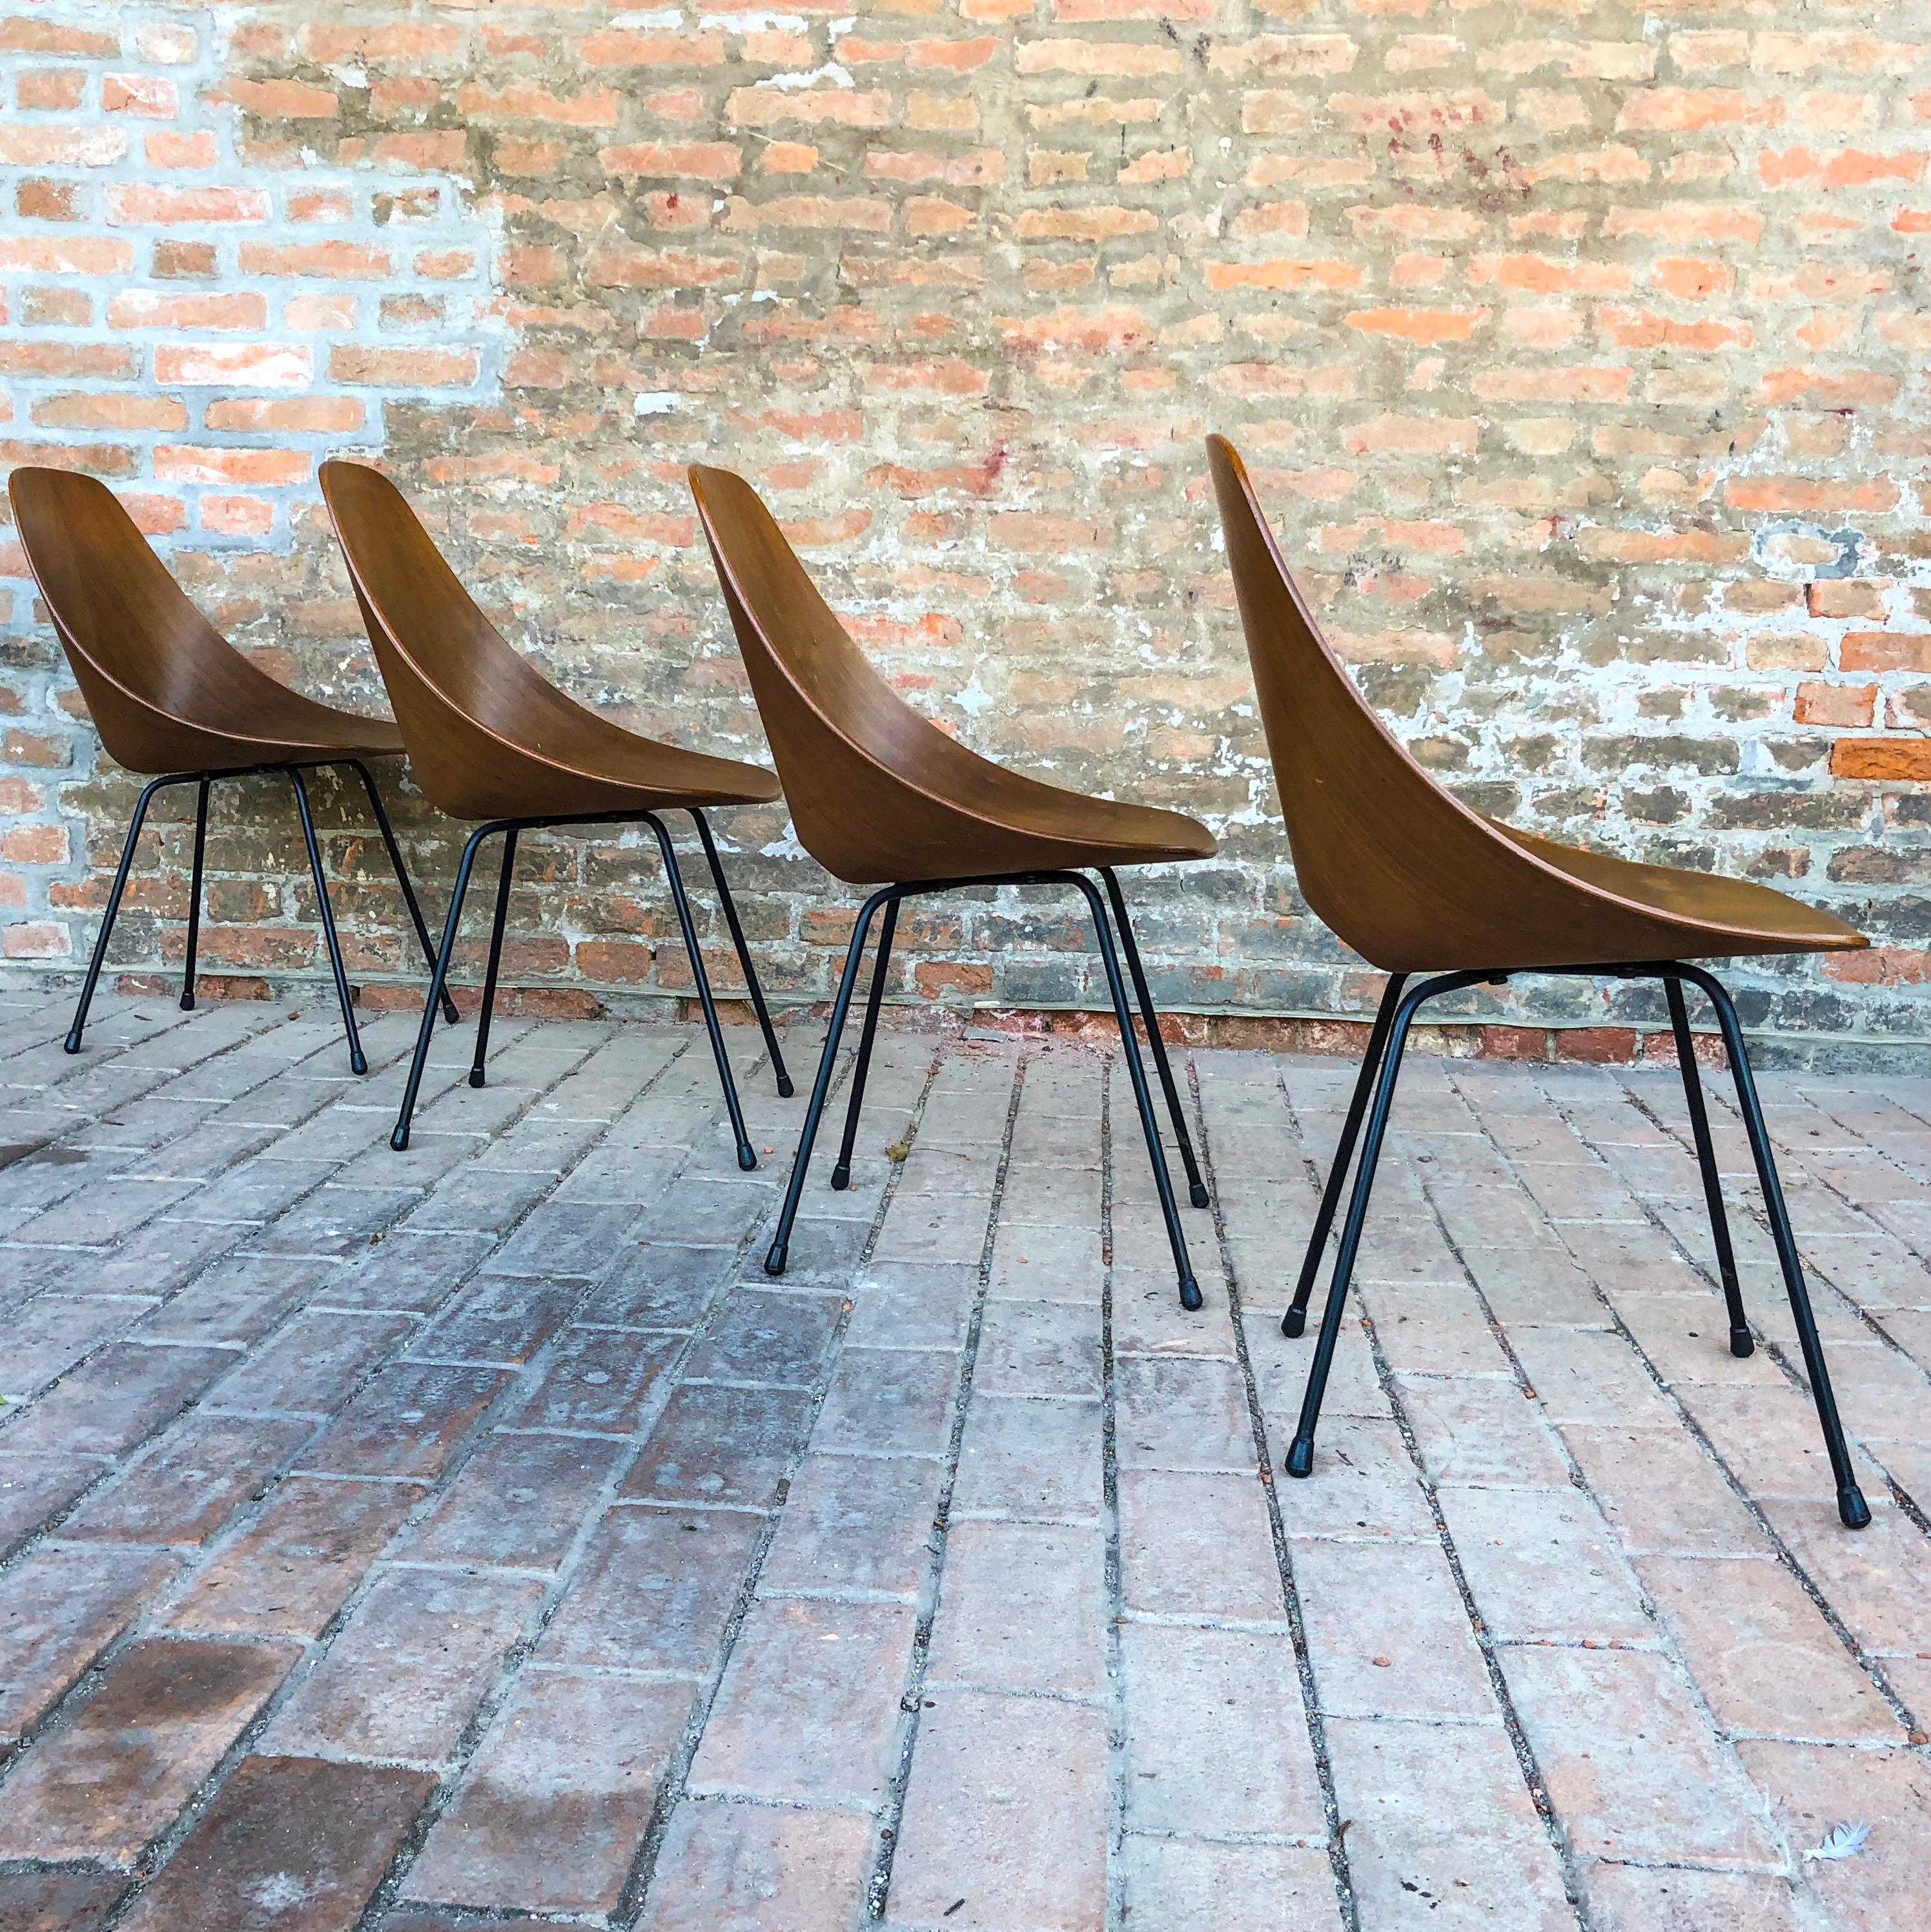 Lacquered Vittorio Nobili Midcentury Teak “Medea” Dining Room Chairs, 1956, Set of Four For Sale